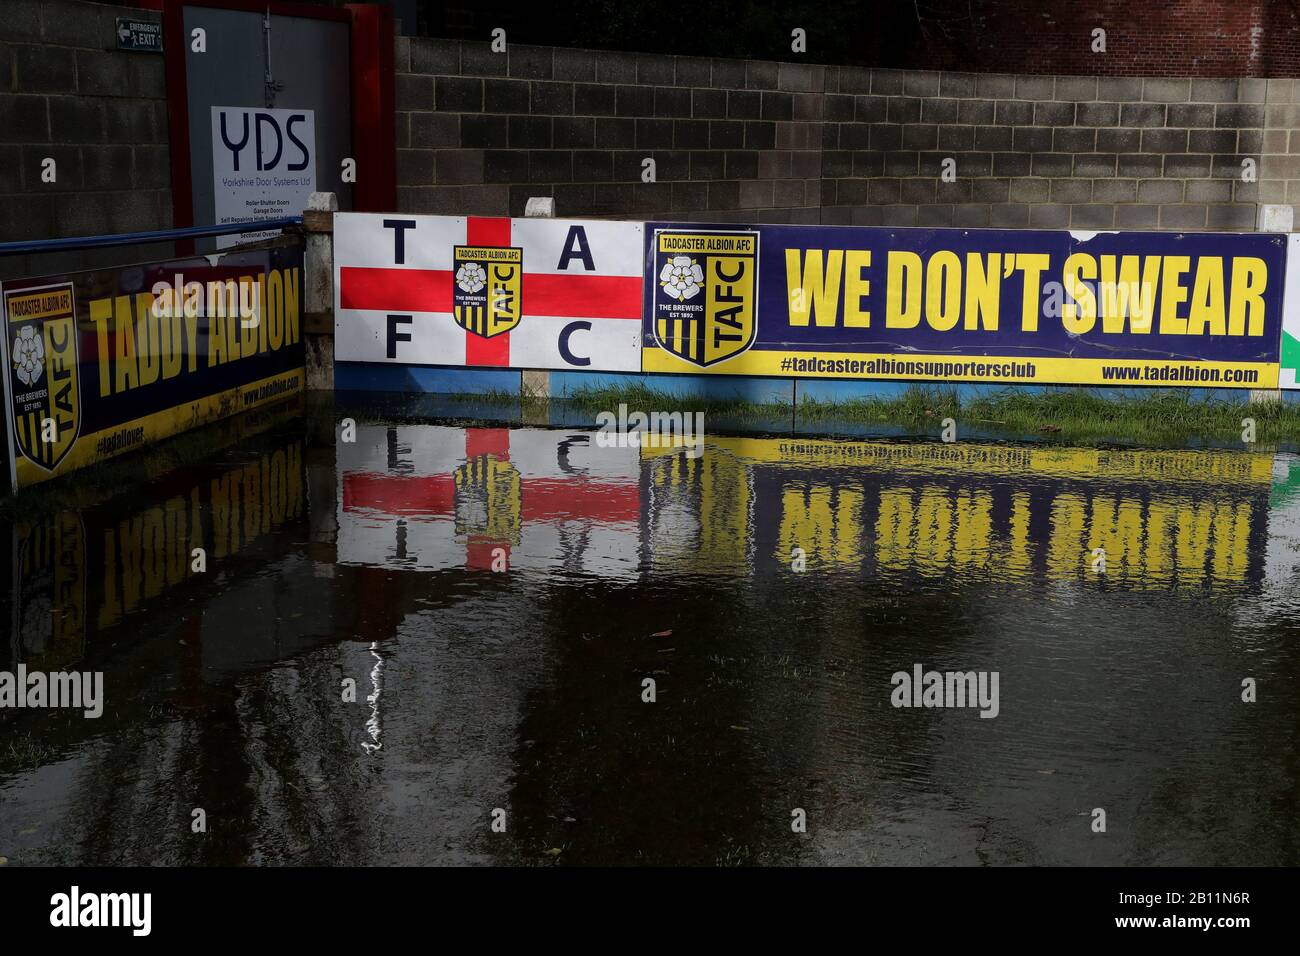 A flooded Tadcaster Albion's Global stadium football ground at John Smith's brewery,Tadcaster, North Yorkshire, as a third consecutive weekend of stormy weather is bringing further flooding misery to already sodden communities. Stock Photo